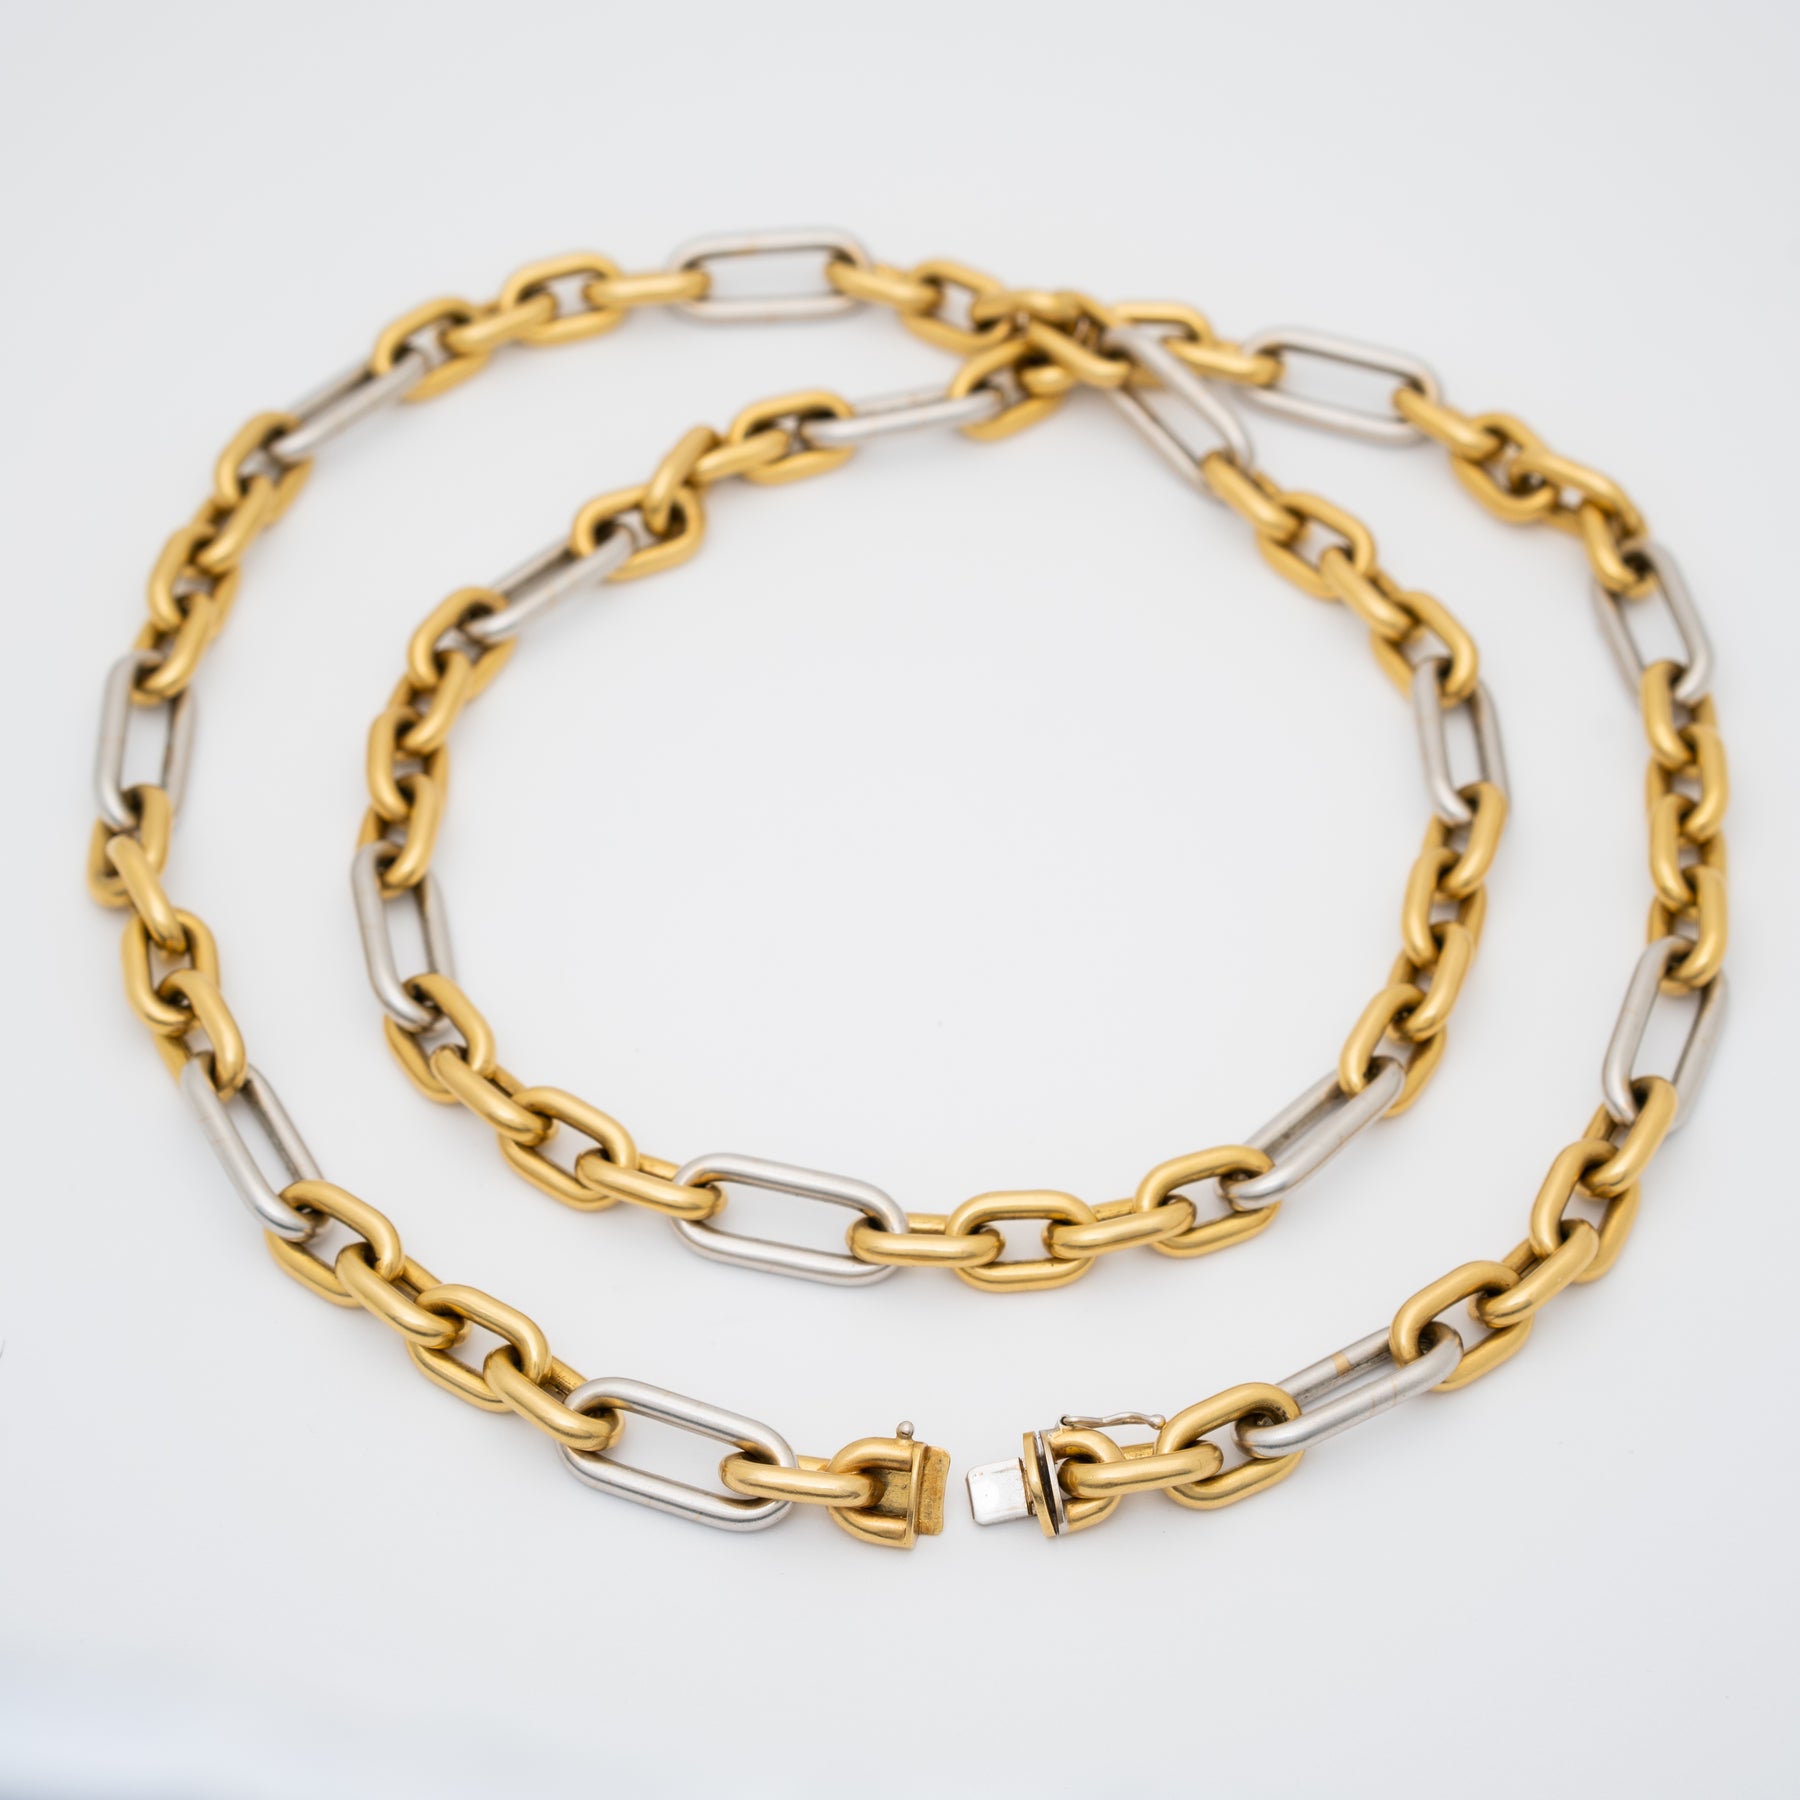 VINTAGE 18K YELLOW AND WHITE GOLD LONG CHAIN c.1980s – STEPHANIE WINDSOR